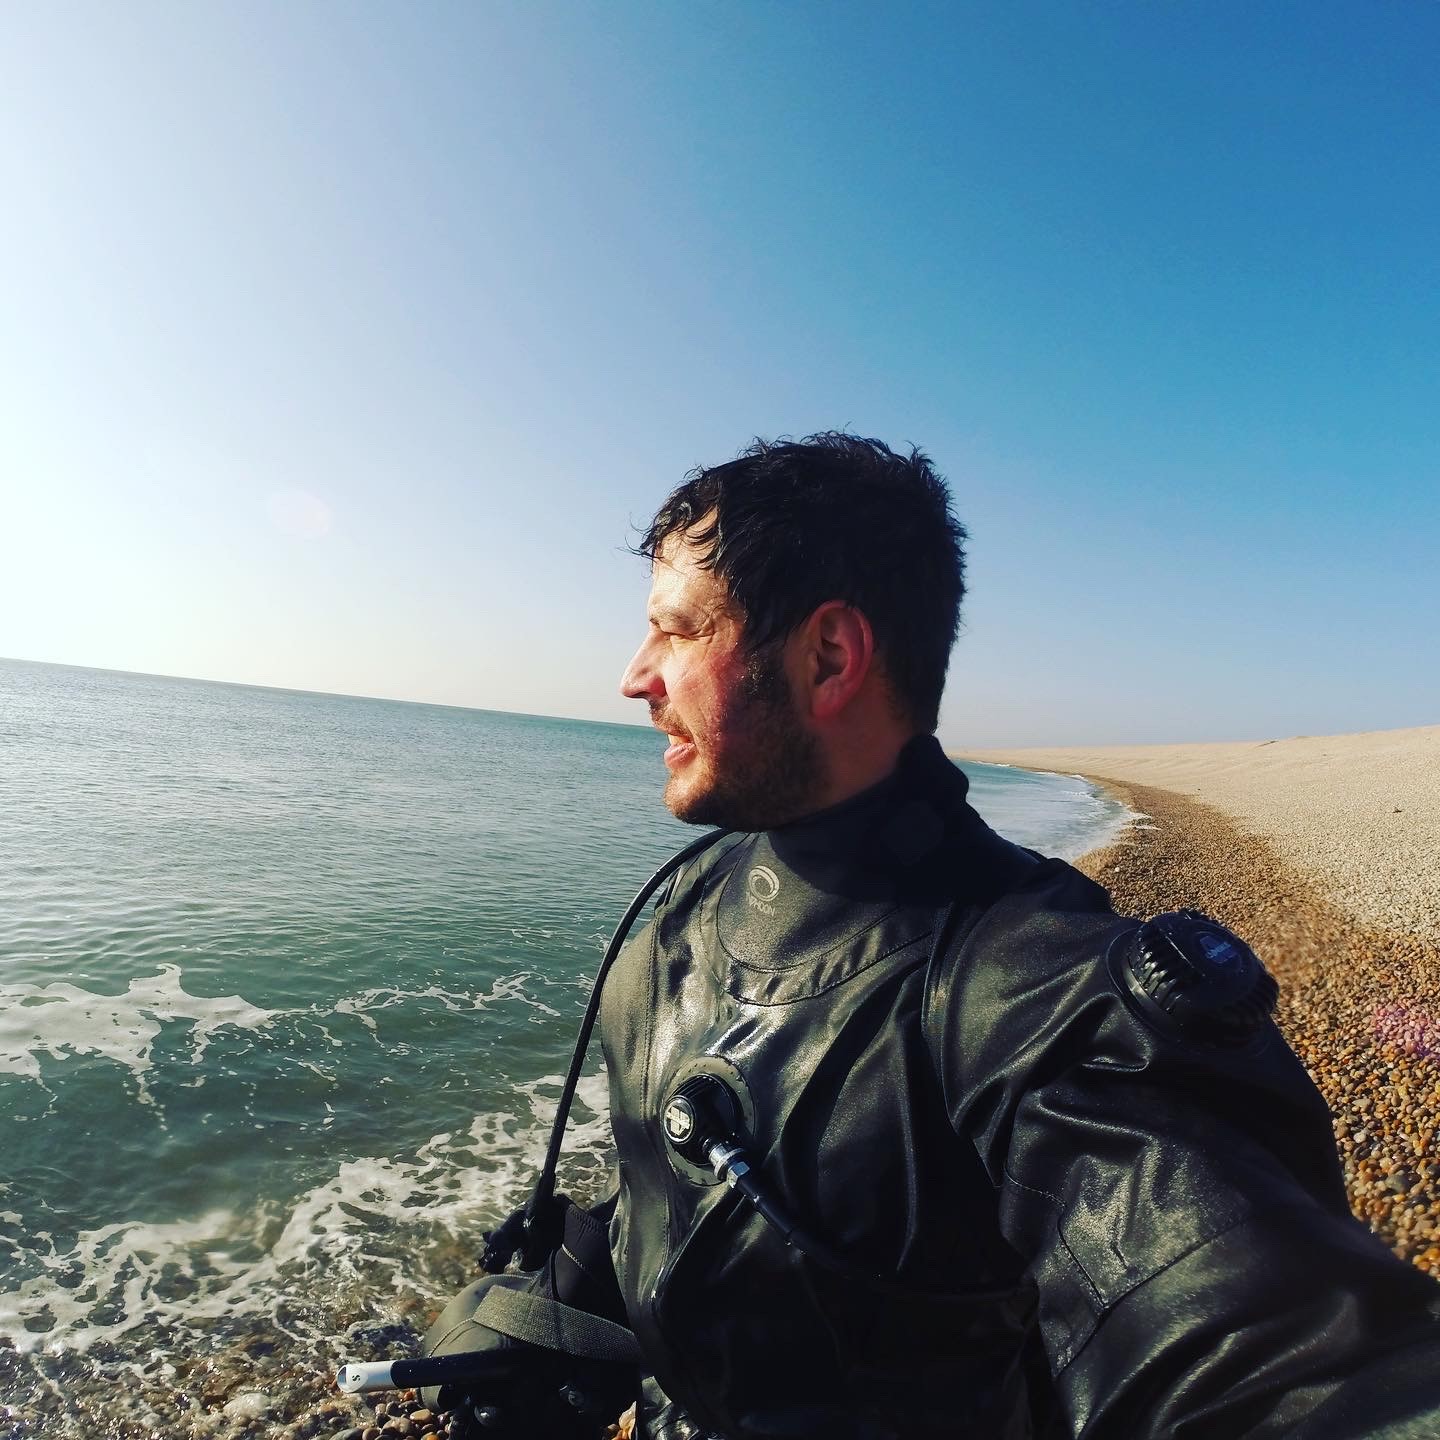 Image of a diver on a beach wearing his Divesuit.